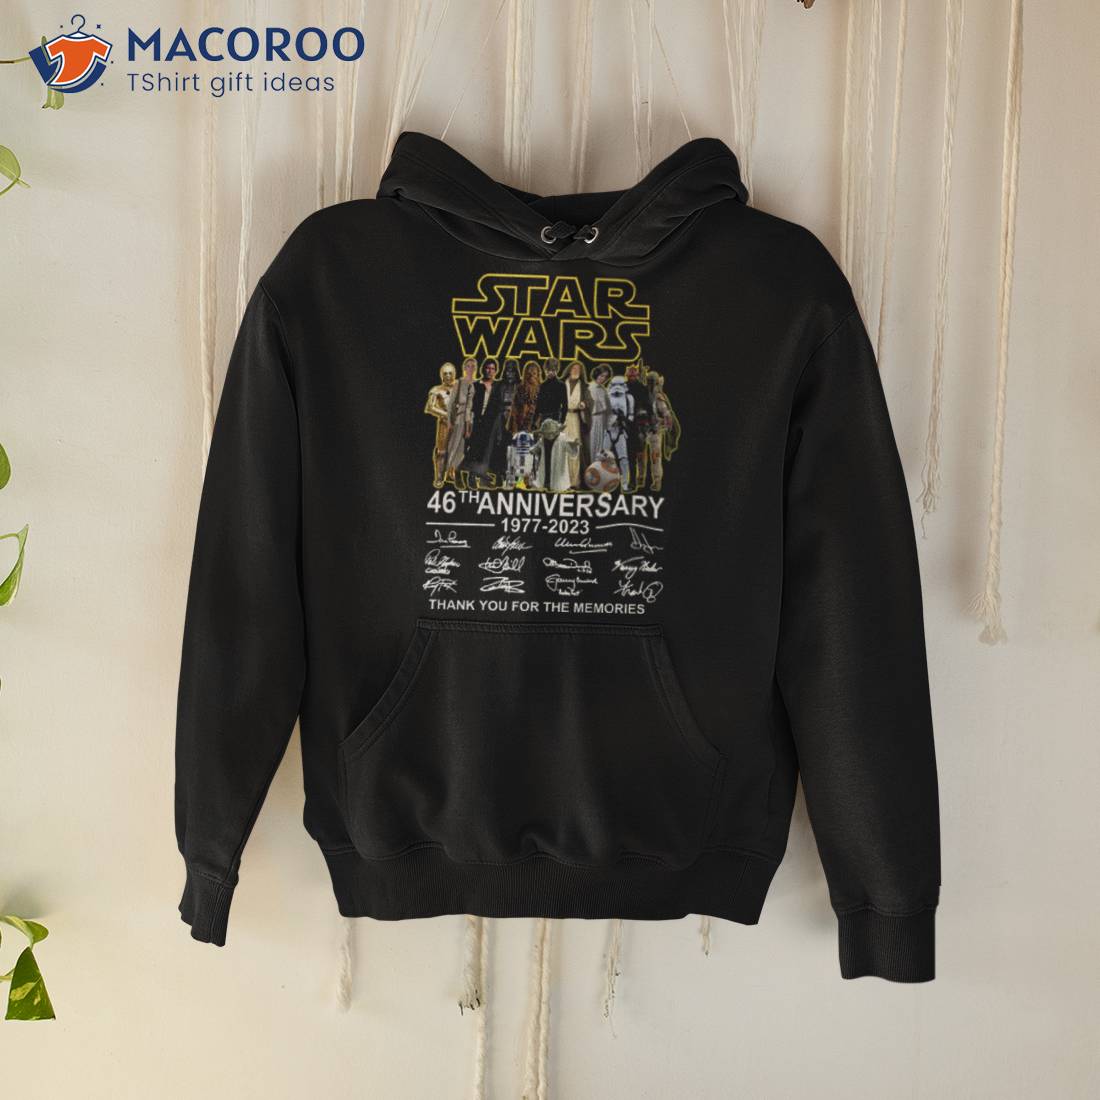 https://images.macoroo.com/wp-content/uploads/2023/05/star-wars-46-anniversary-1977-2023-thank-you-for-the-memories-t-shirt-hoodie.jpg